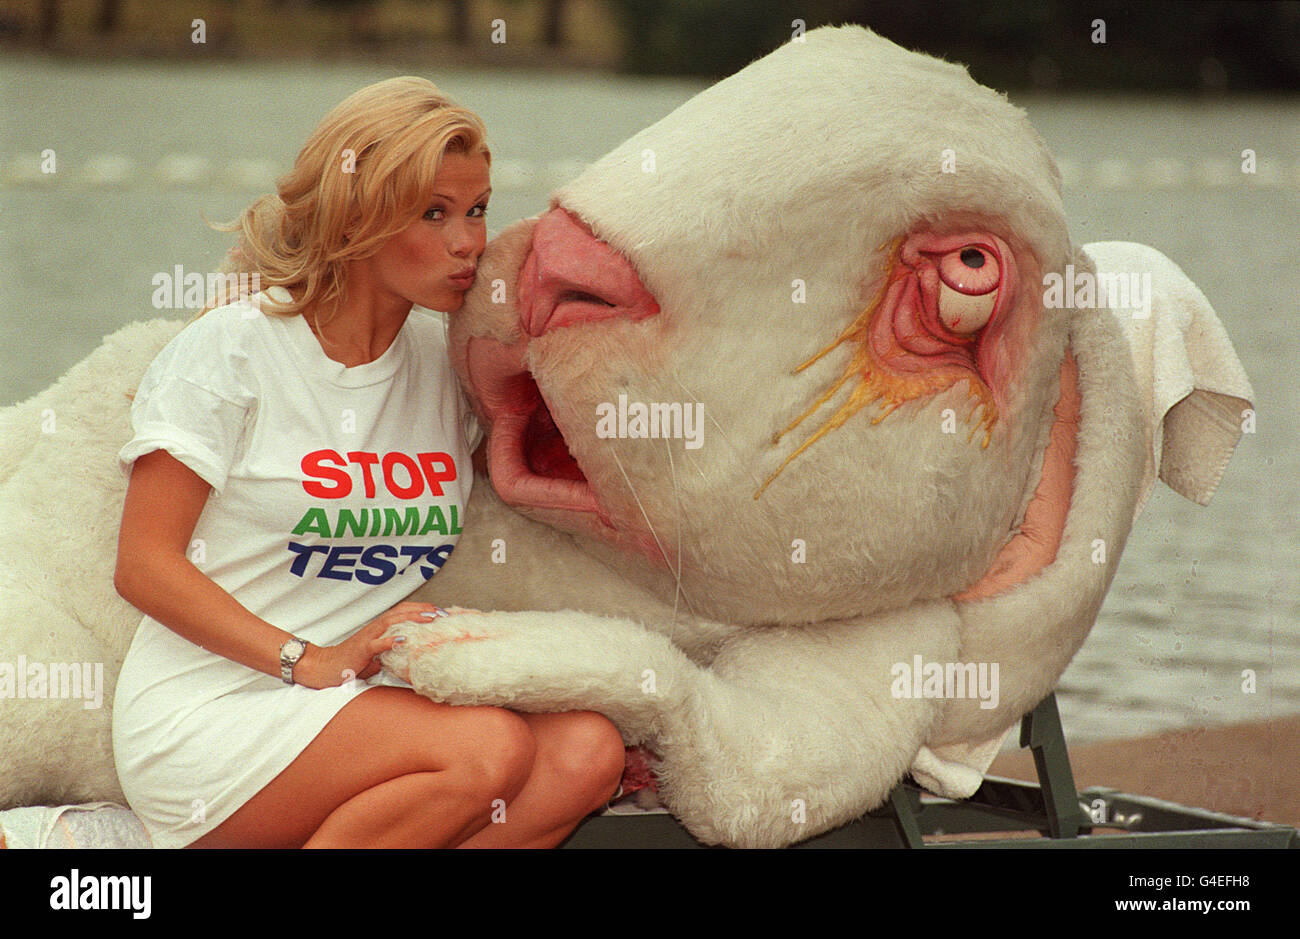 PA NEWS PHOTO 26/8/98 MELINDA MESSENGER IN HYDE PARK WITH 'VANITY THE BUNNY' TO AID THE BUAV'S (BRITISH UNION FOR THE ABOLITION OF VIVISECTION) ATTEMPTS TO PROMOTE A RANGE OF CRUELY-FREE PRODUCTS. Stock Photo